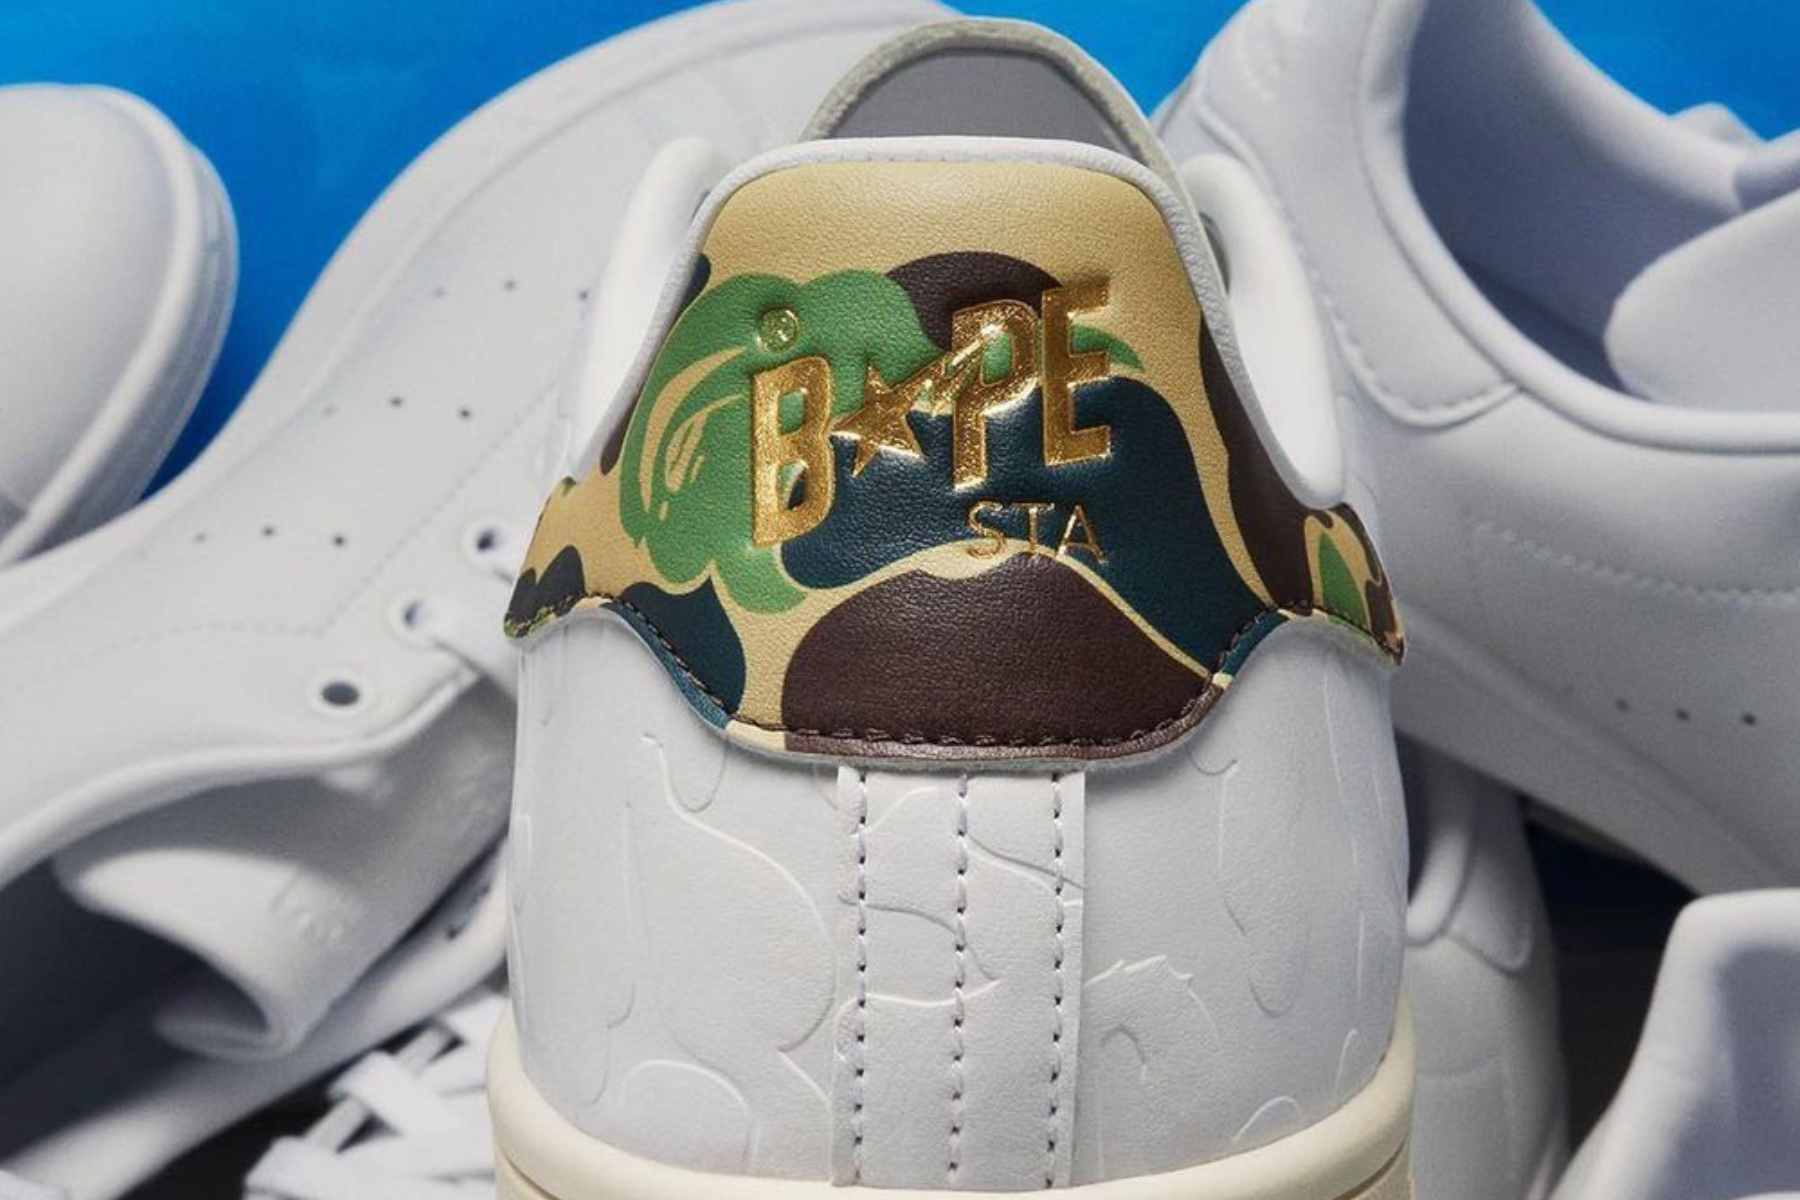 BAPE & adidas are back for Fall/Winter 2023 to drop two takes on the latter's Stan Smith silhouette, a signature silhouette from the adidas archives.